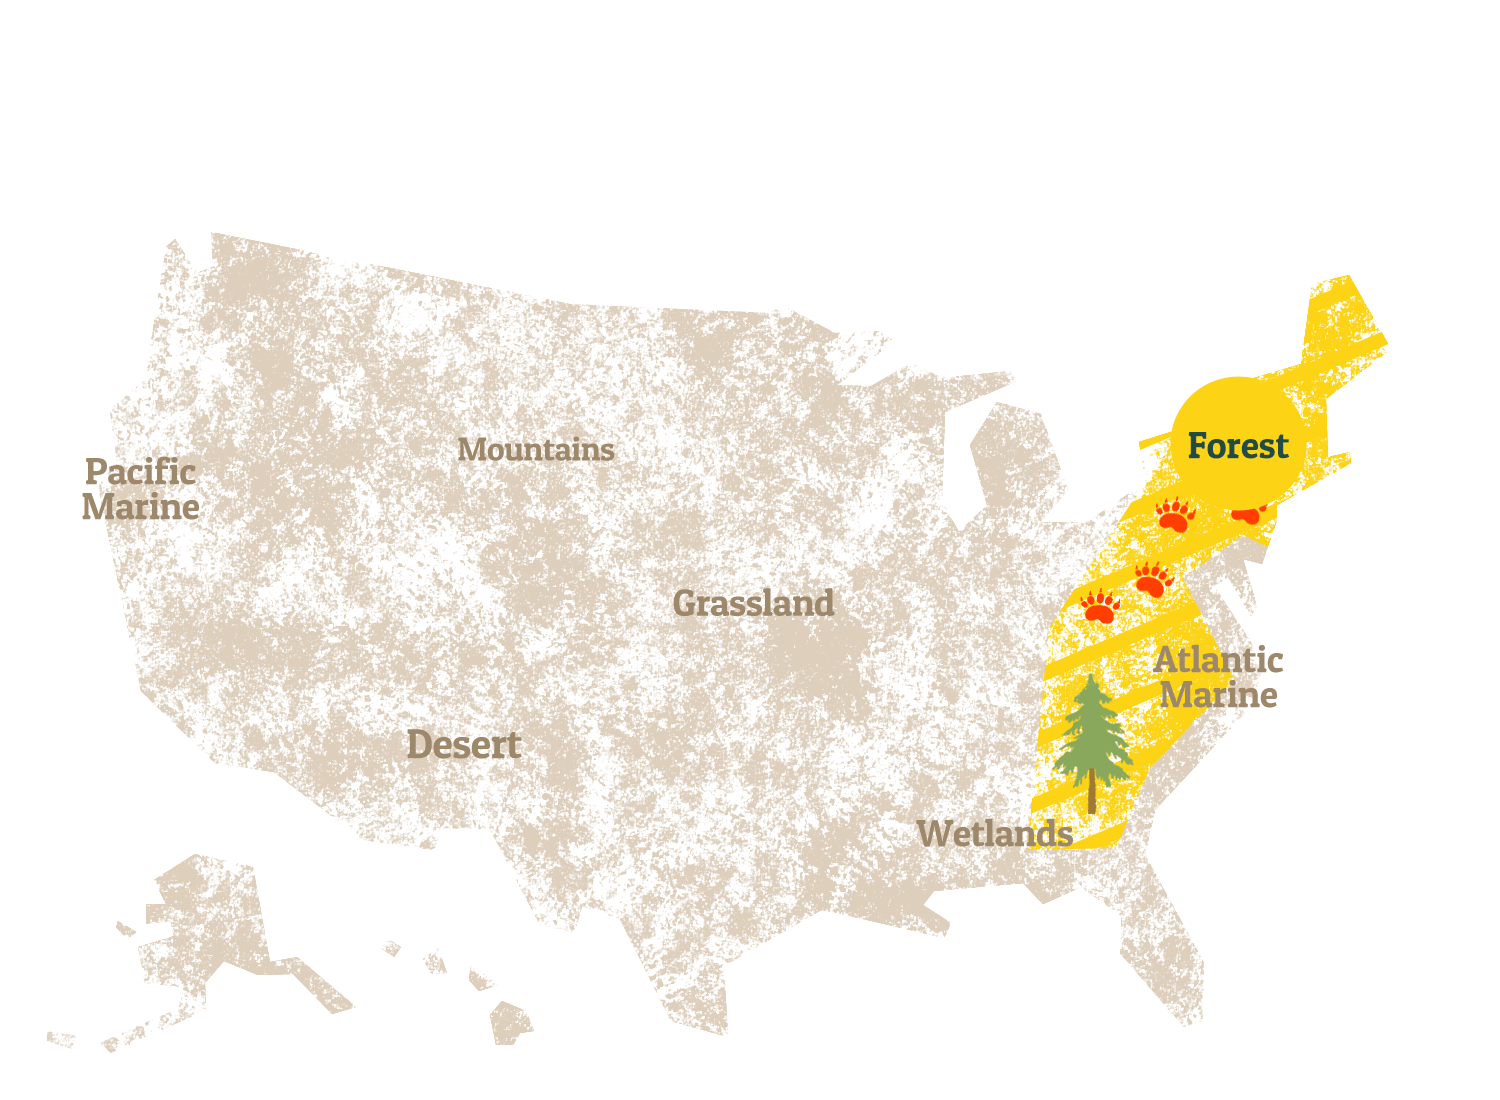 A graphic map of the United States, highlighting the Forest.